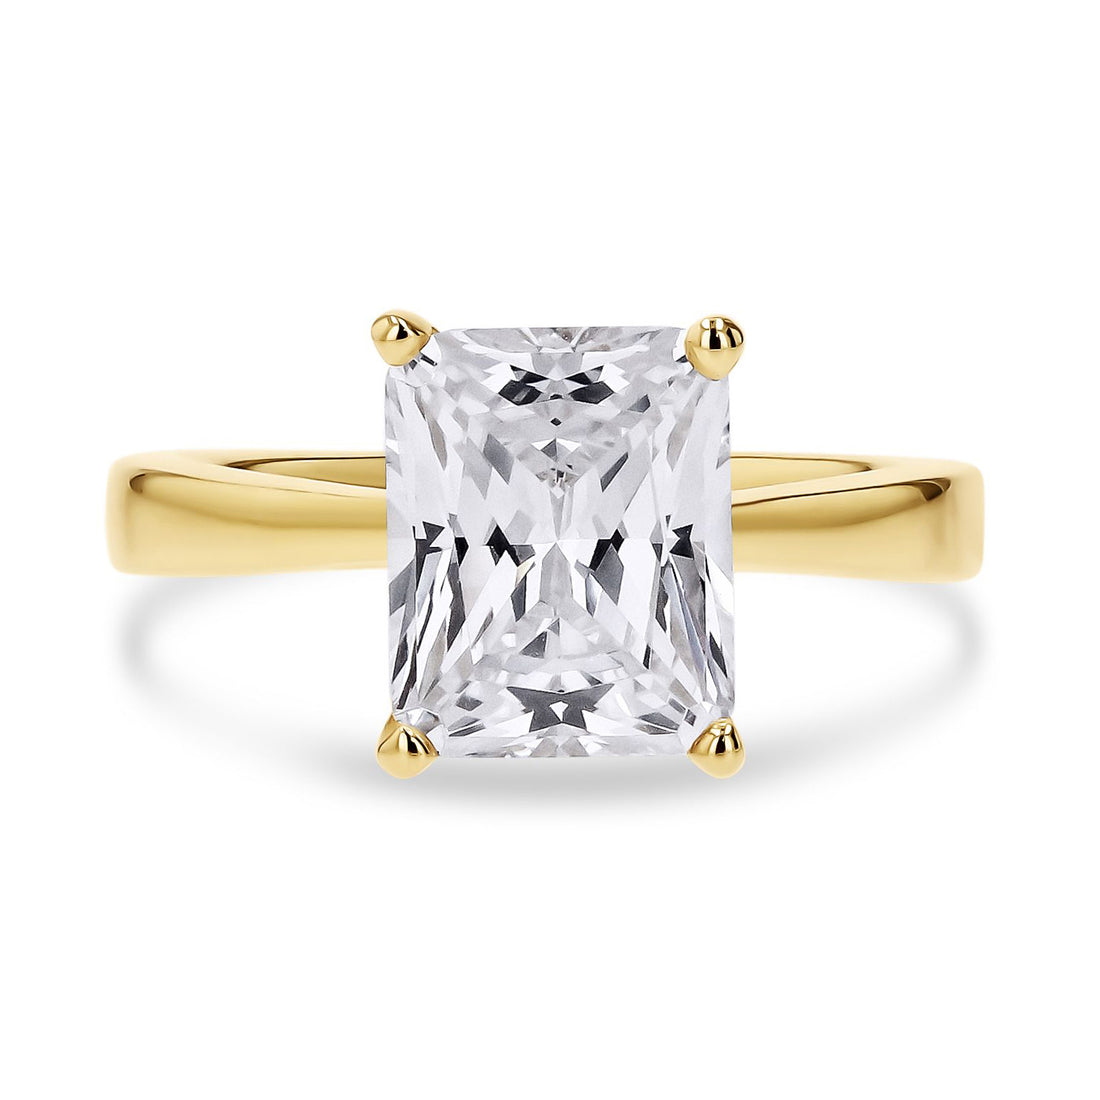 The Skeie's Solitaire Engagement Ring - Skeie's Jewelers